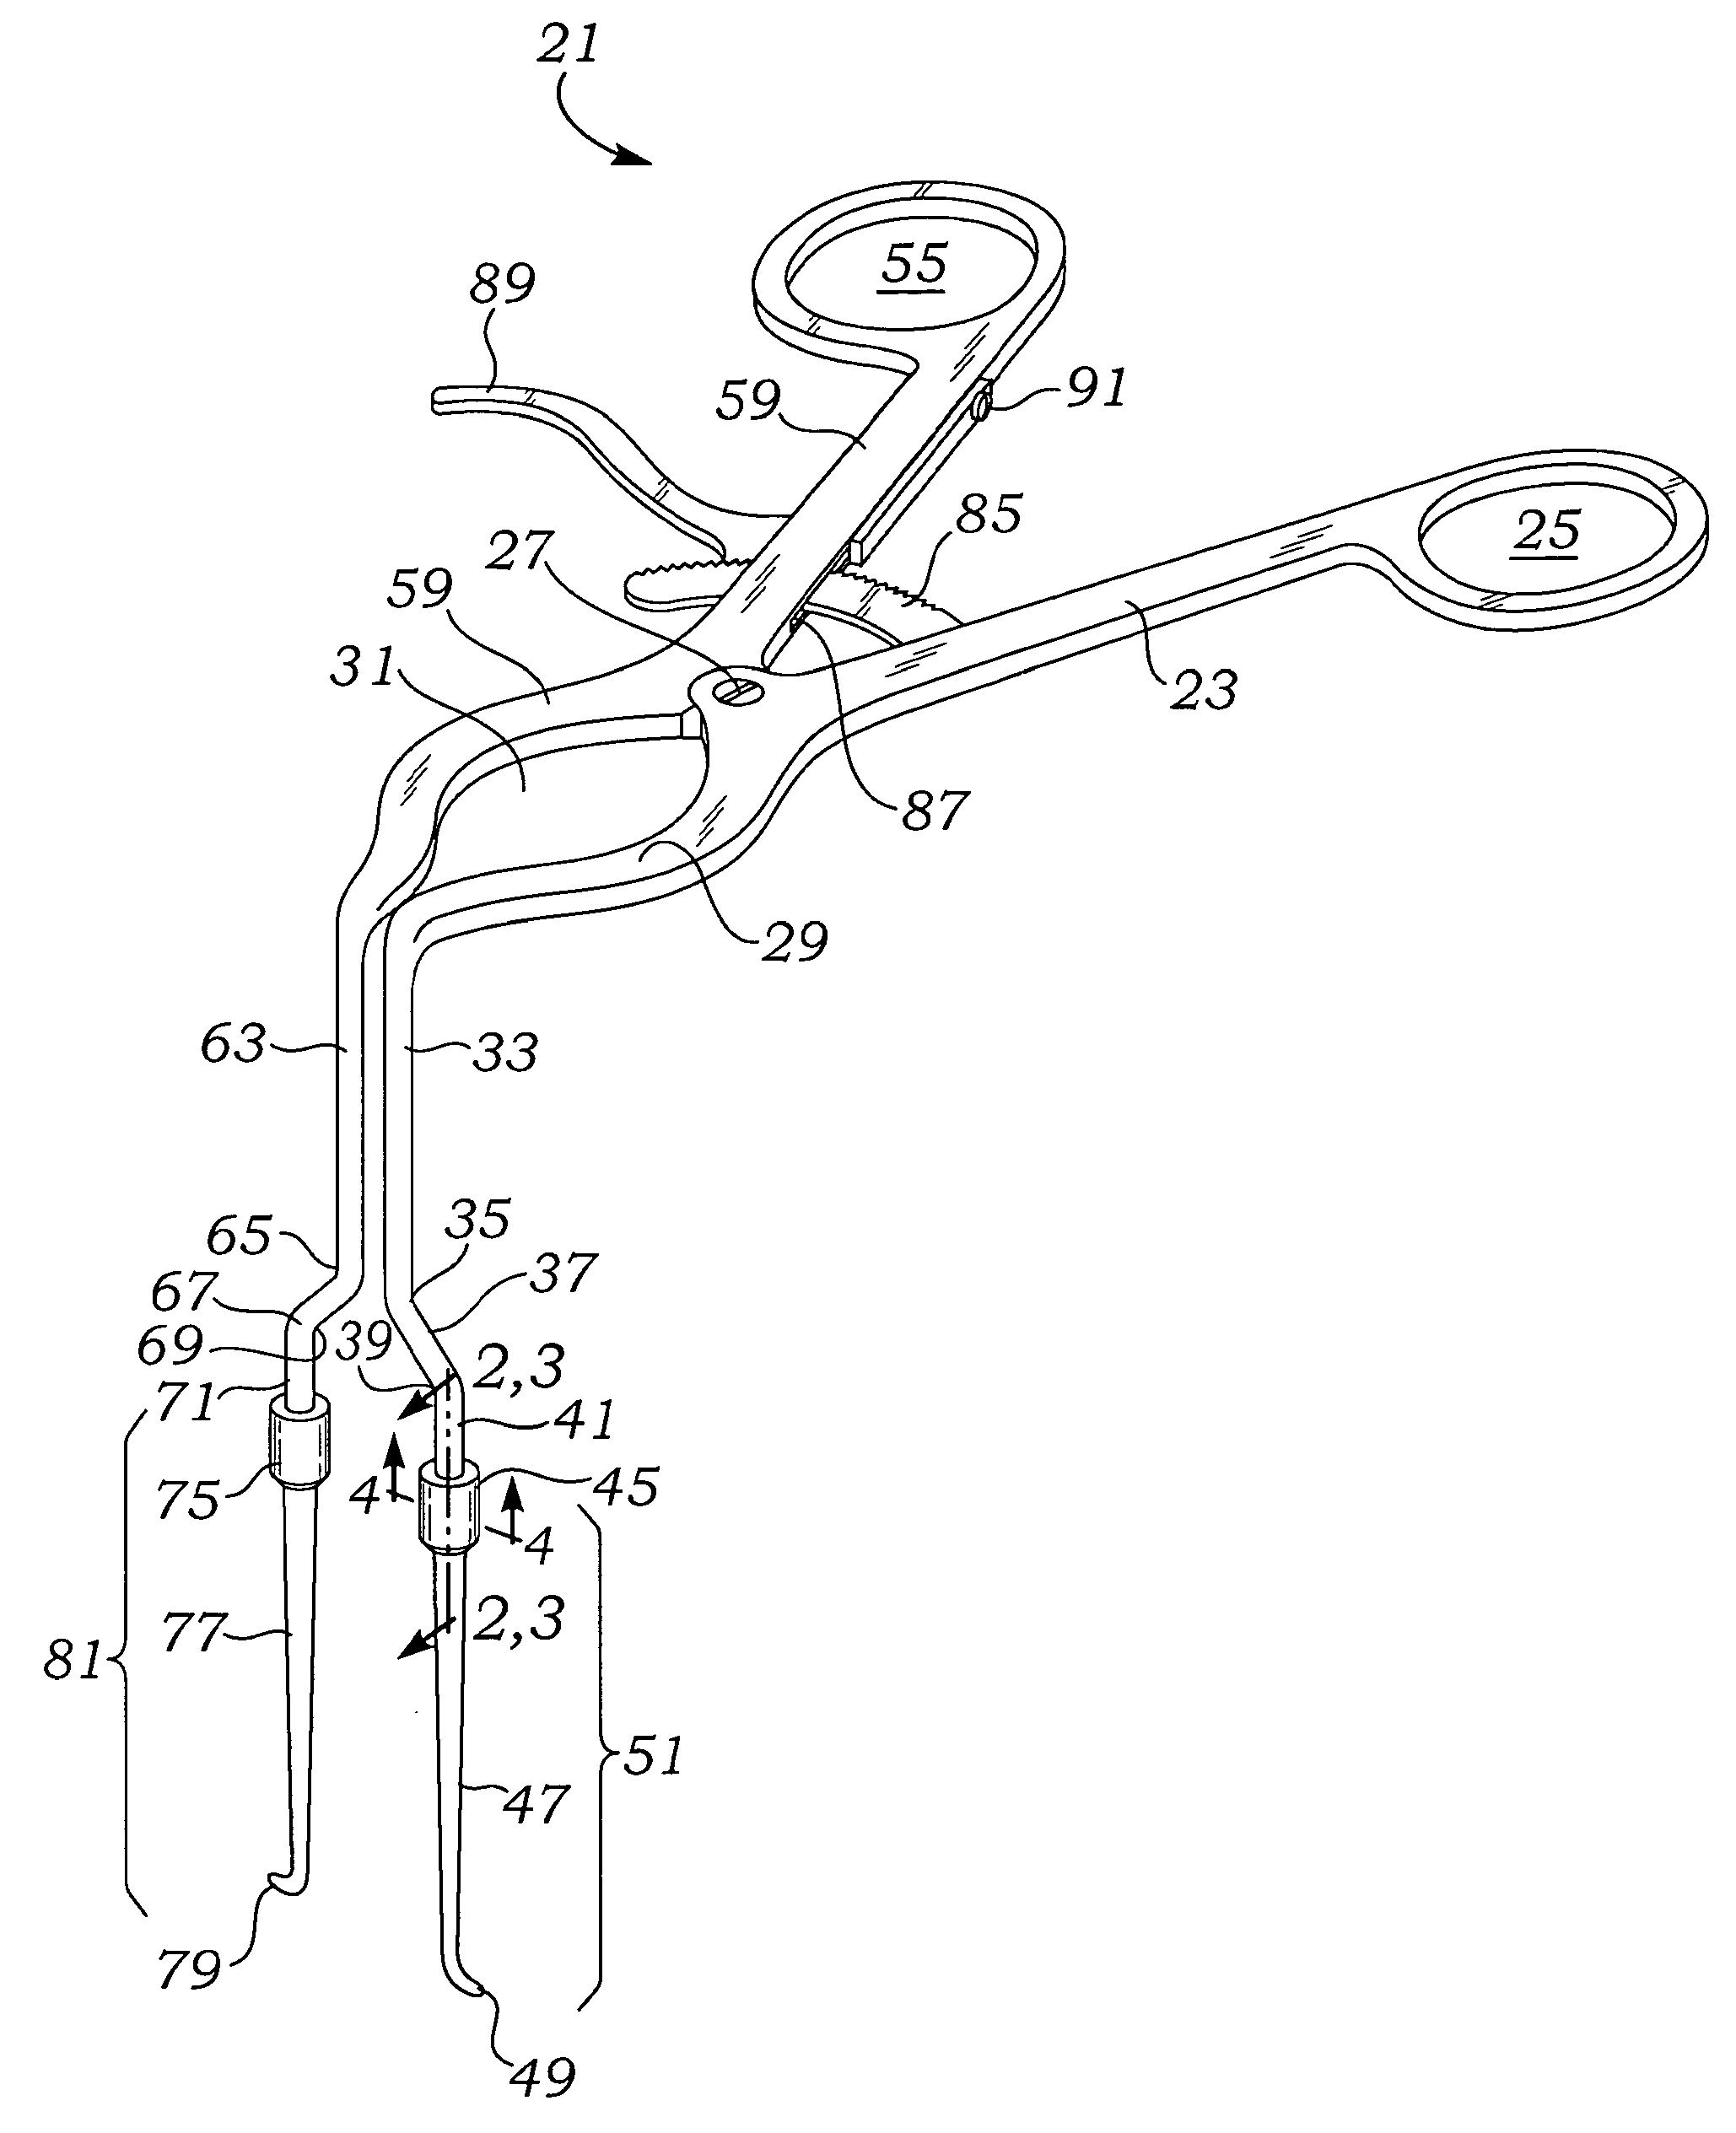 Minimal incision maximal access spine surgery instruments and method